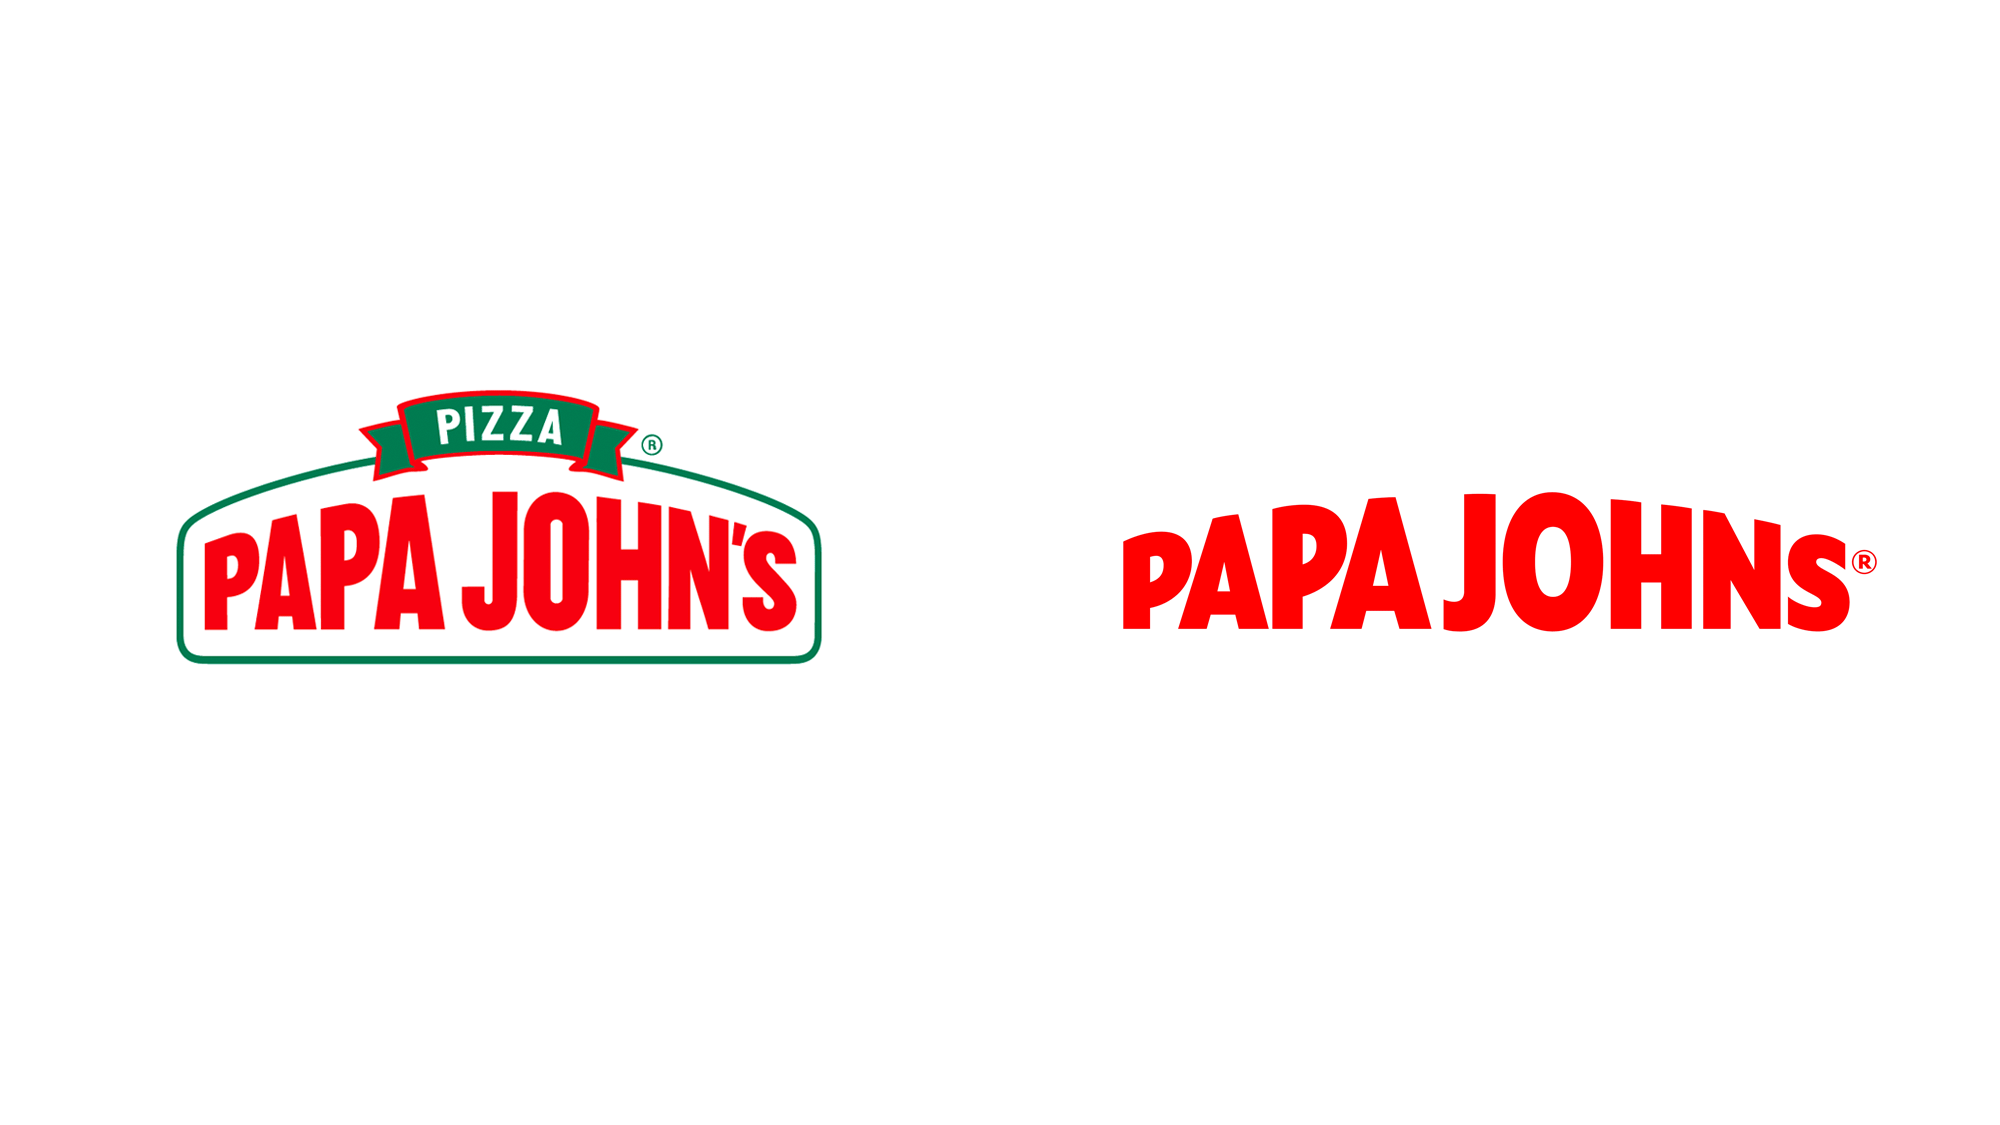 New Logo and Identity for Papa Johns by Mathews Hale Design and forpeople